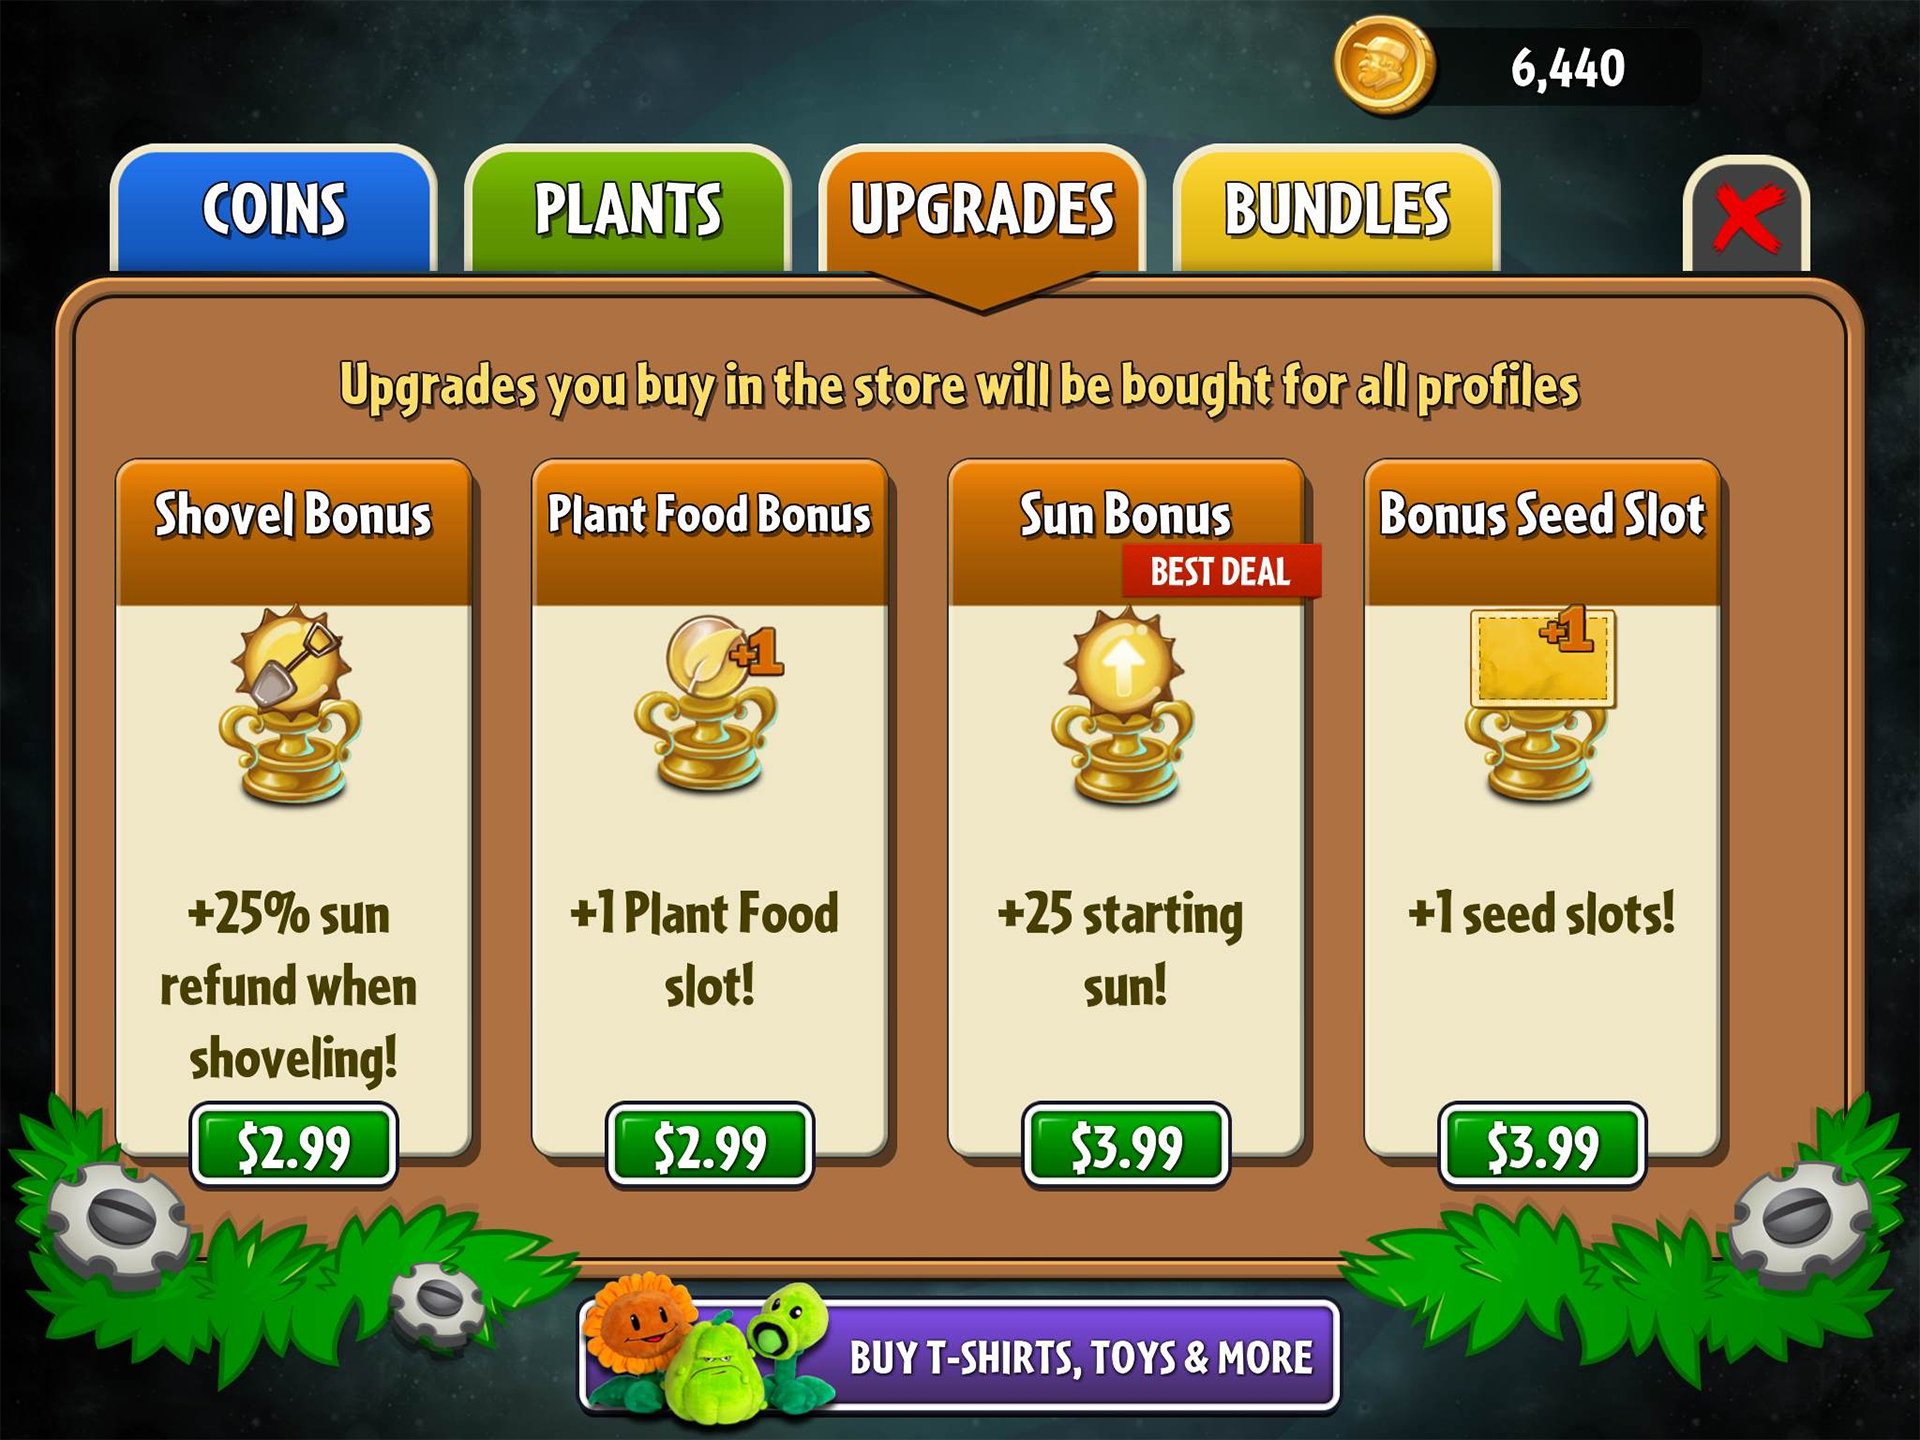 App Review: Plants Vs. Zombies 2 Is Free-To-Play That’s Better Without Paying